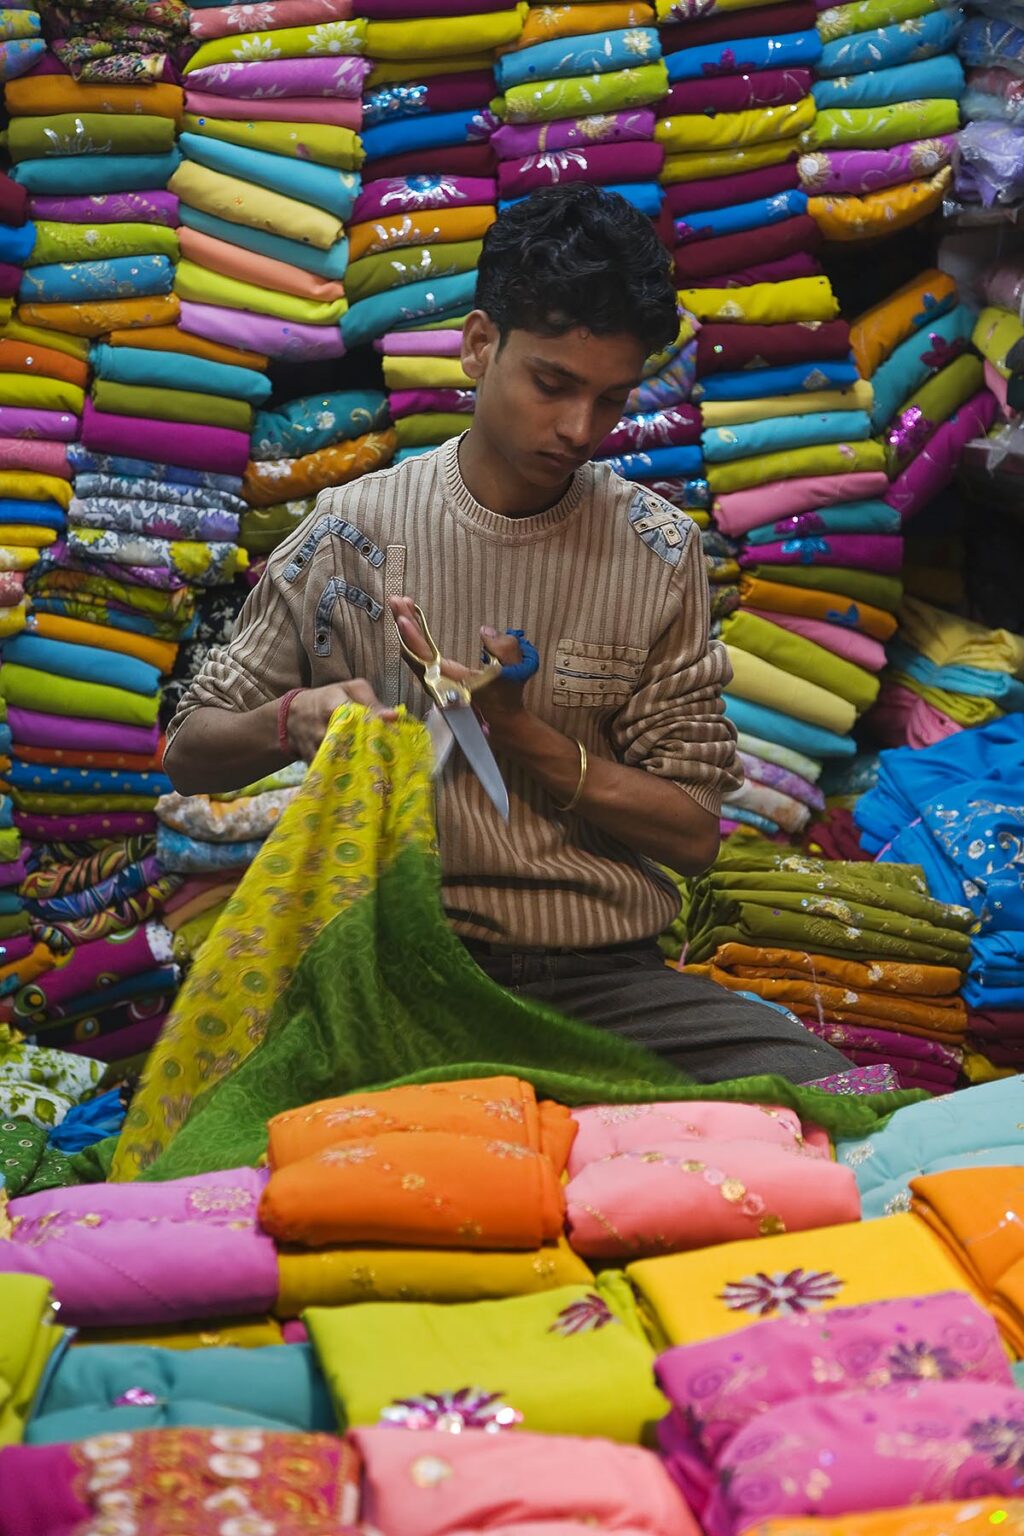 A man works in a stall in the SARI MARKET of CHANDNI CHOWK - OLD DELHI, INDIA